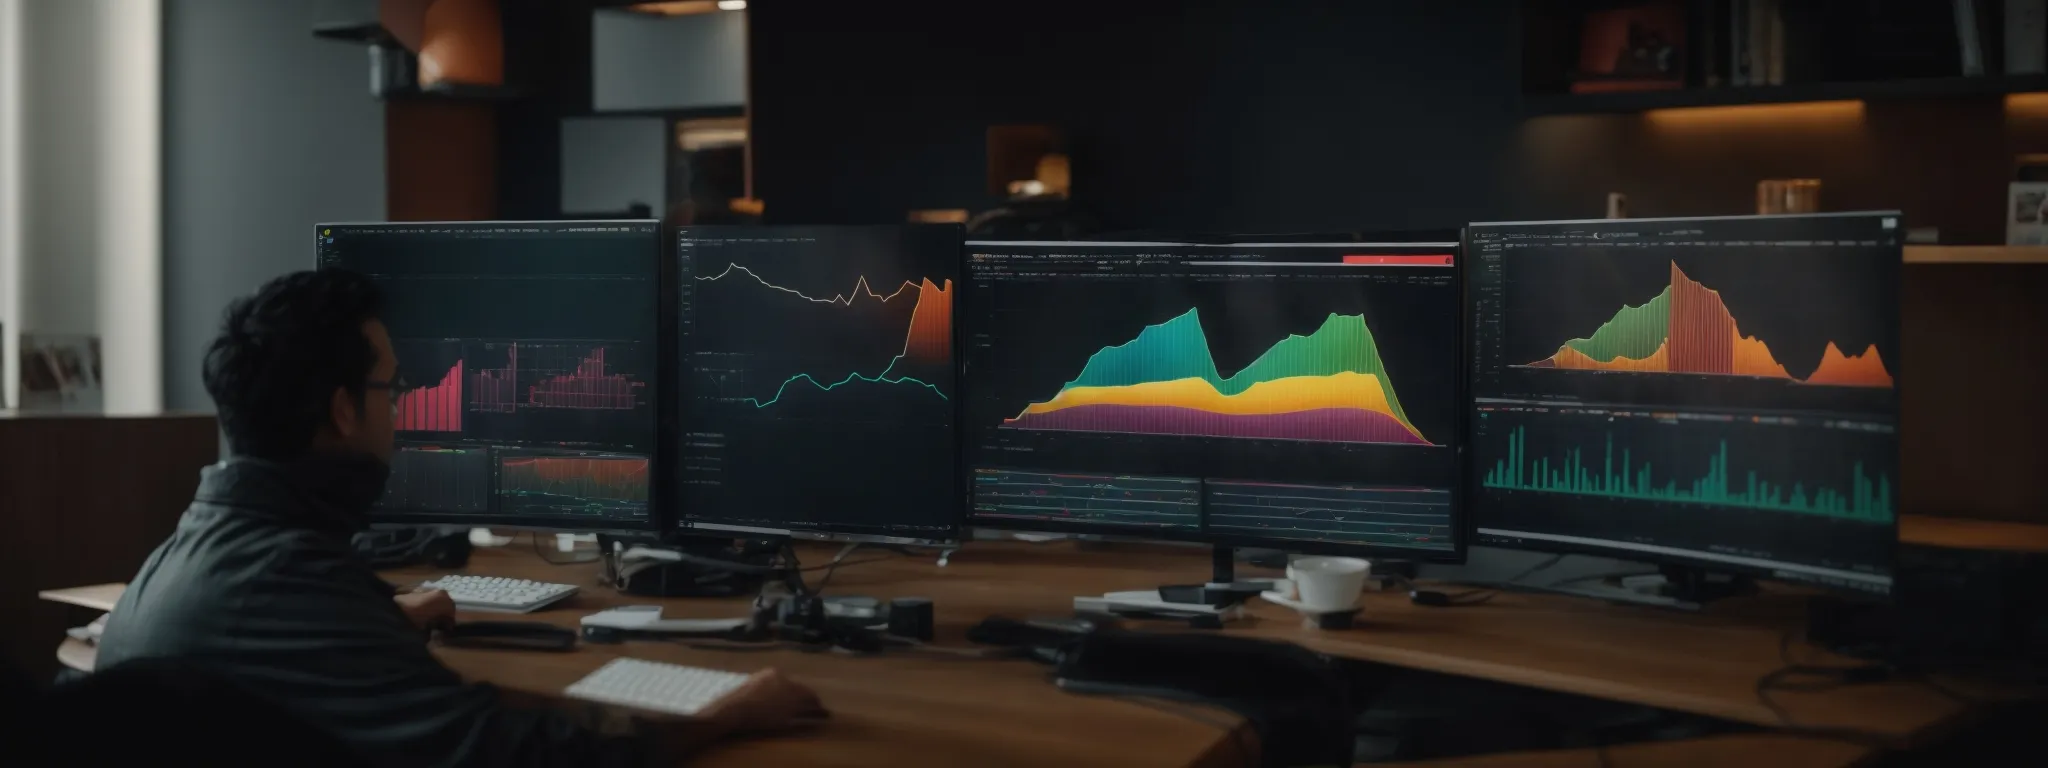 two professionals collaborate over a computer displaying colorful graphs and customer analytics.